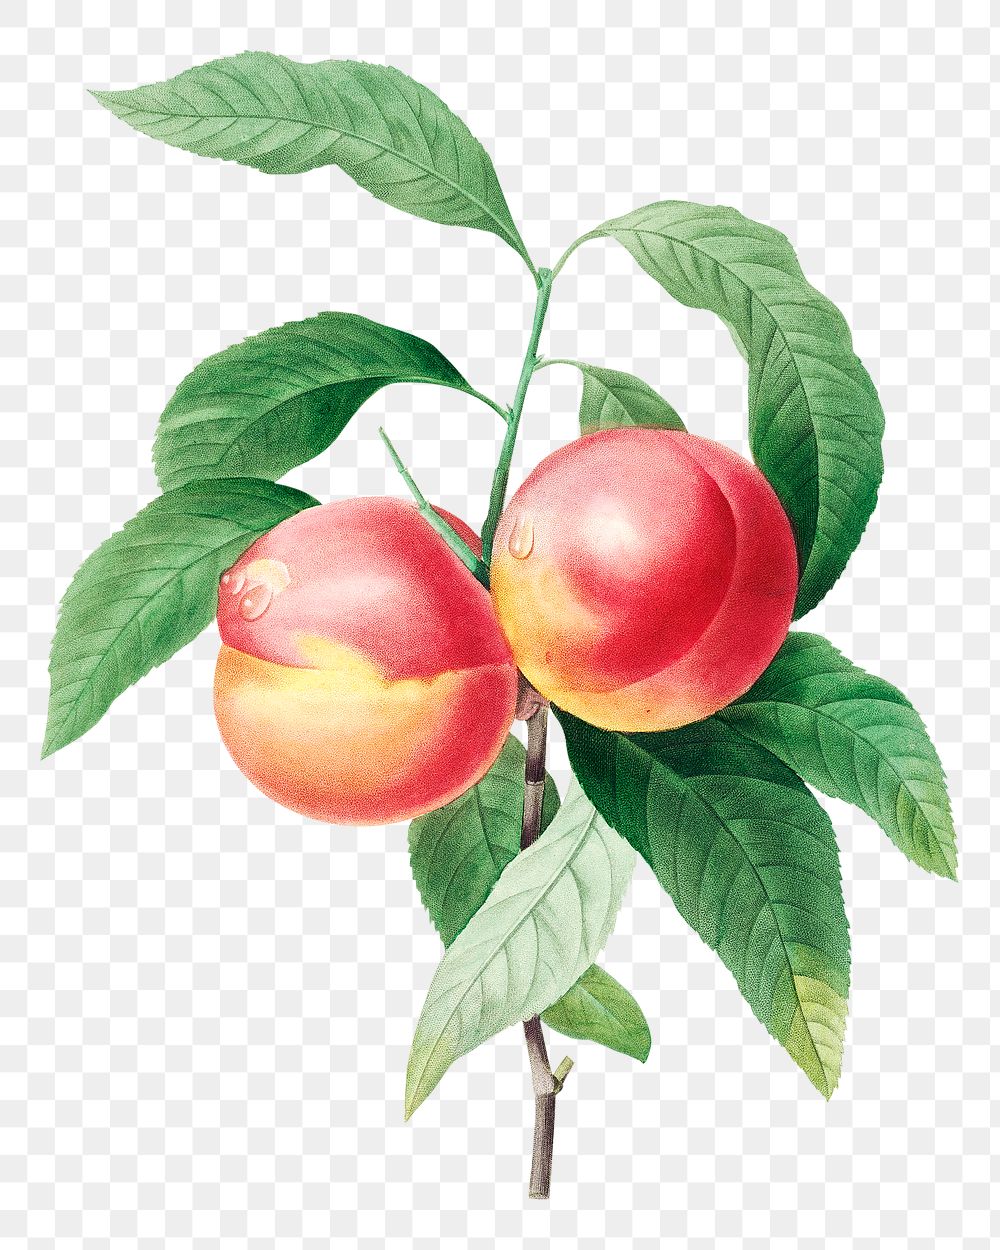 Peaches on a branch png botanical illustration, remixed from artworks by Pierre-Joseph Redout&eacute;